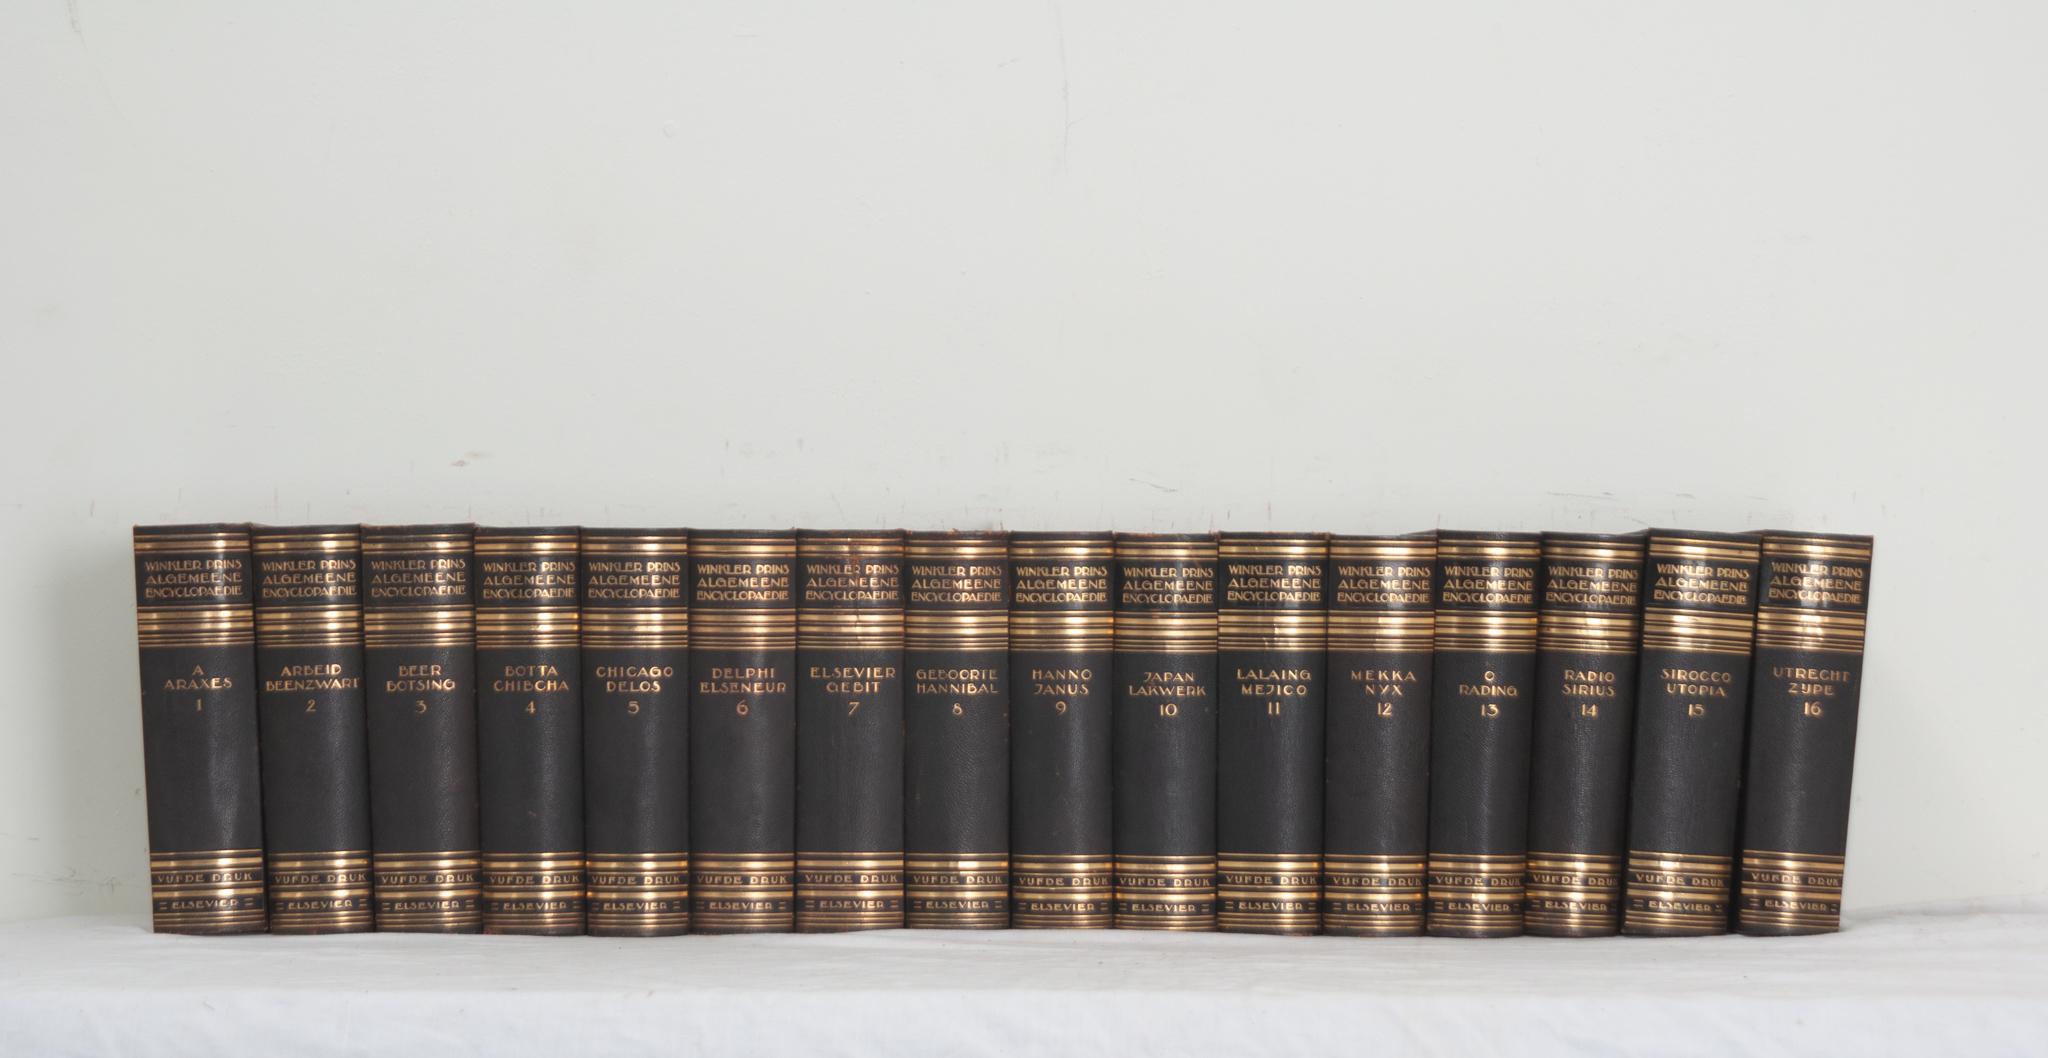 A collection of sixteen volumes of a Dutch encyclopedia set published from 1932-1938.  This set of books is leather bound with the Dutch title; Winkler Prins Algemeene Encyclopaedie, and respective volume number stamped in gold lettering. The pages